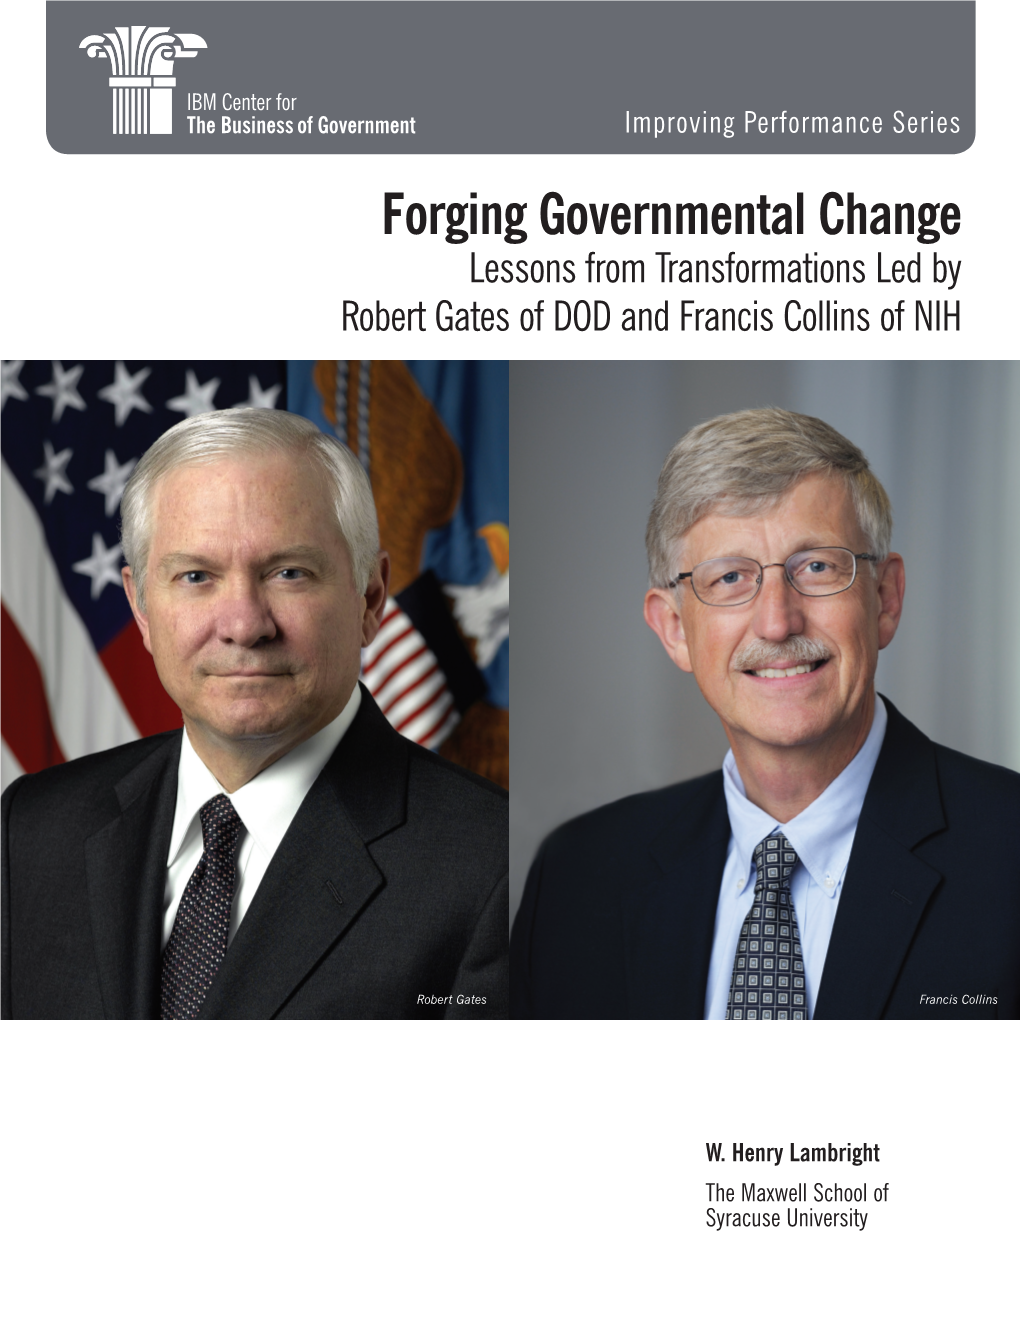 Forging Governmental Change Lessons from Transformations Led by Robert Gates of DOD and Francis Collins of NIH